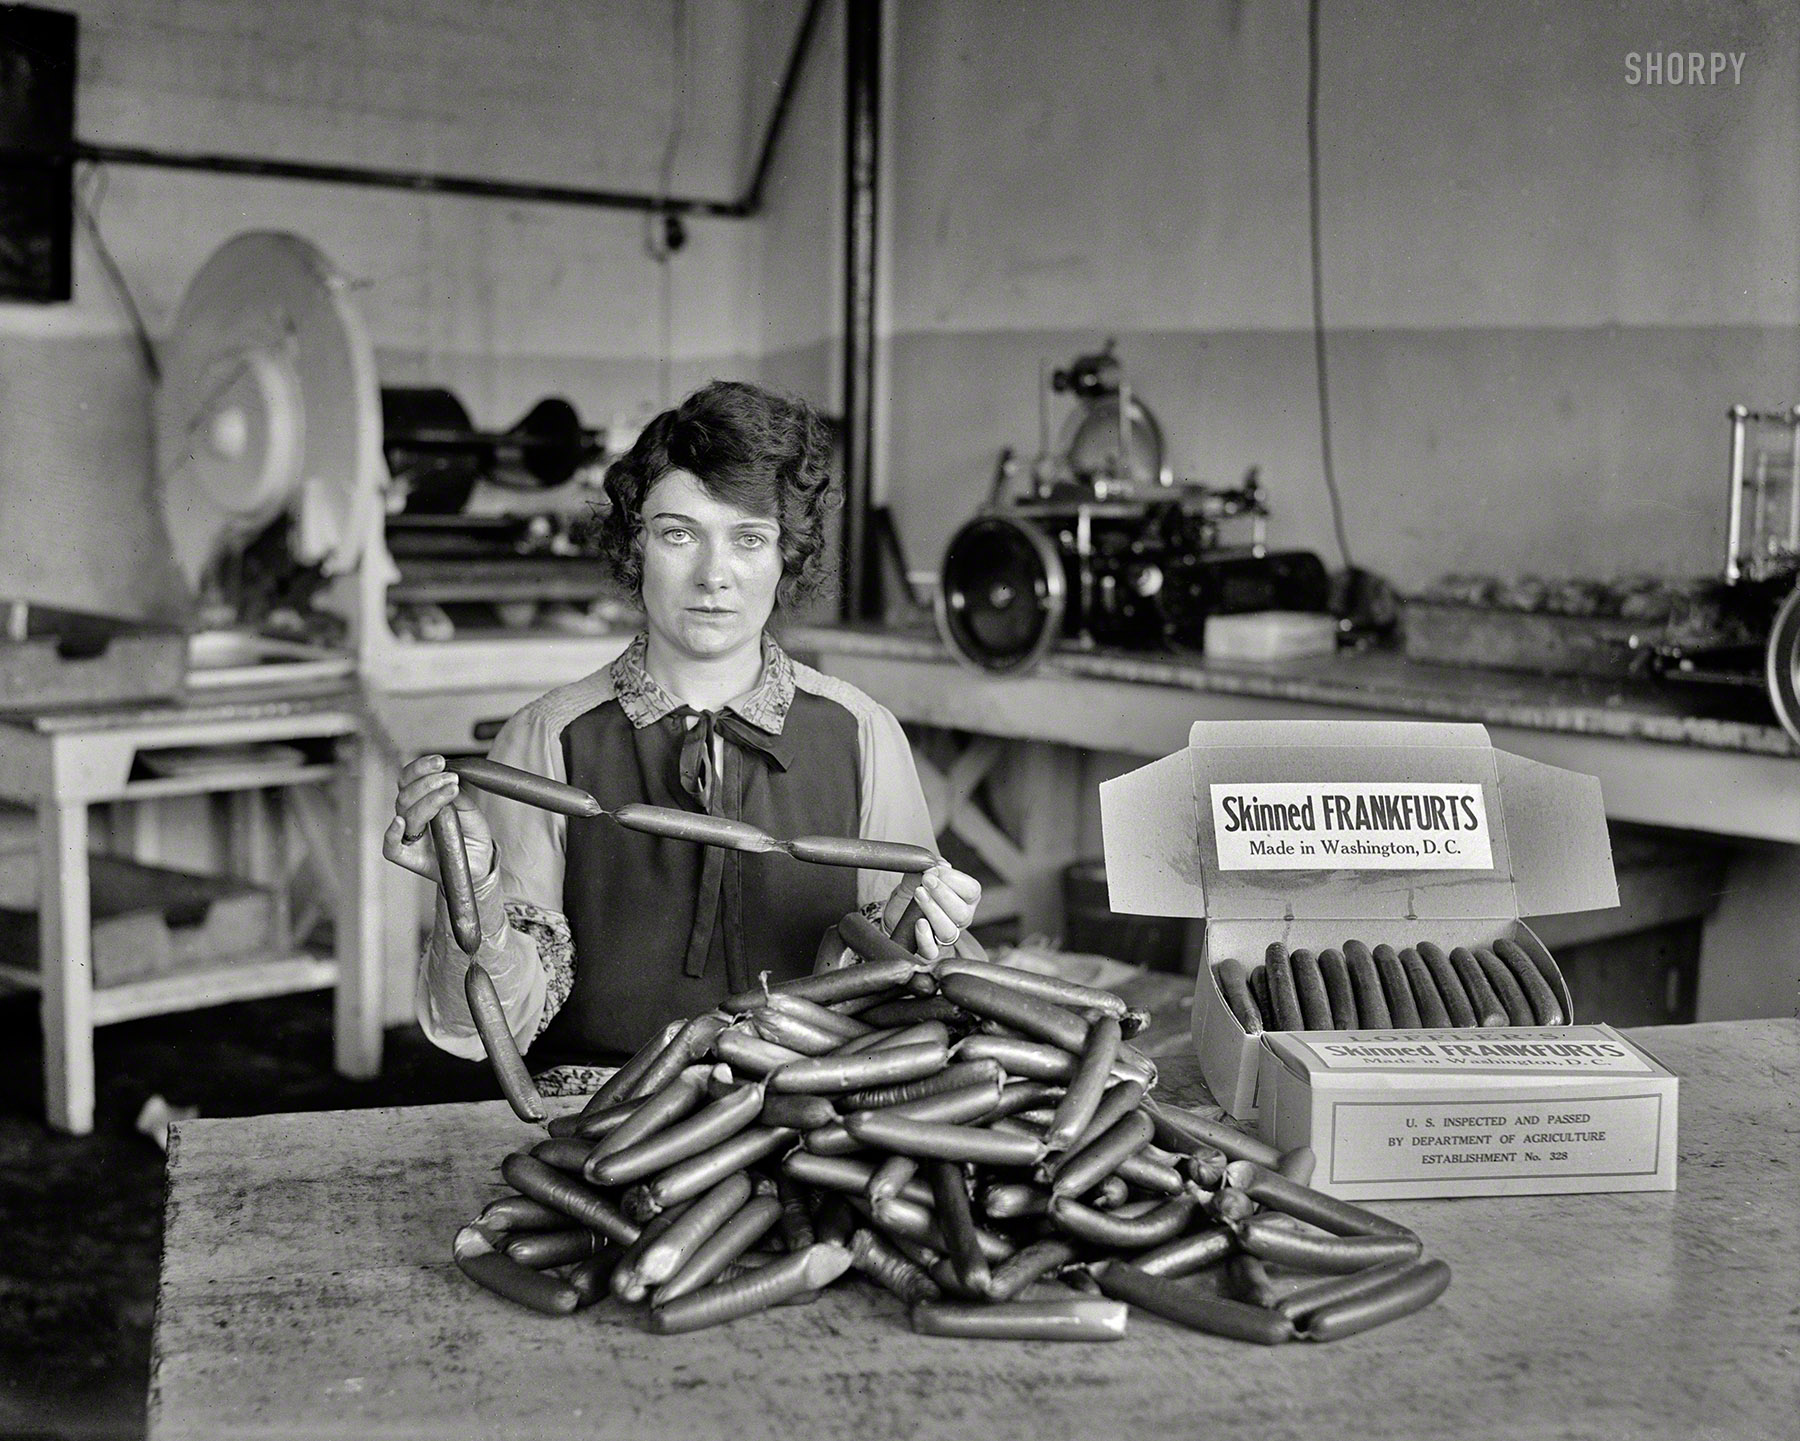 1927. "Skinned frankfurts, made in Washington, D.C." What Bismarck said about laws and sausages: It turns out you can watch them (or not watch them) being made in the same place. Harris & Ewing glass negative. View full size.